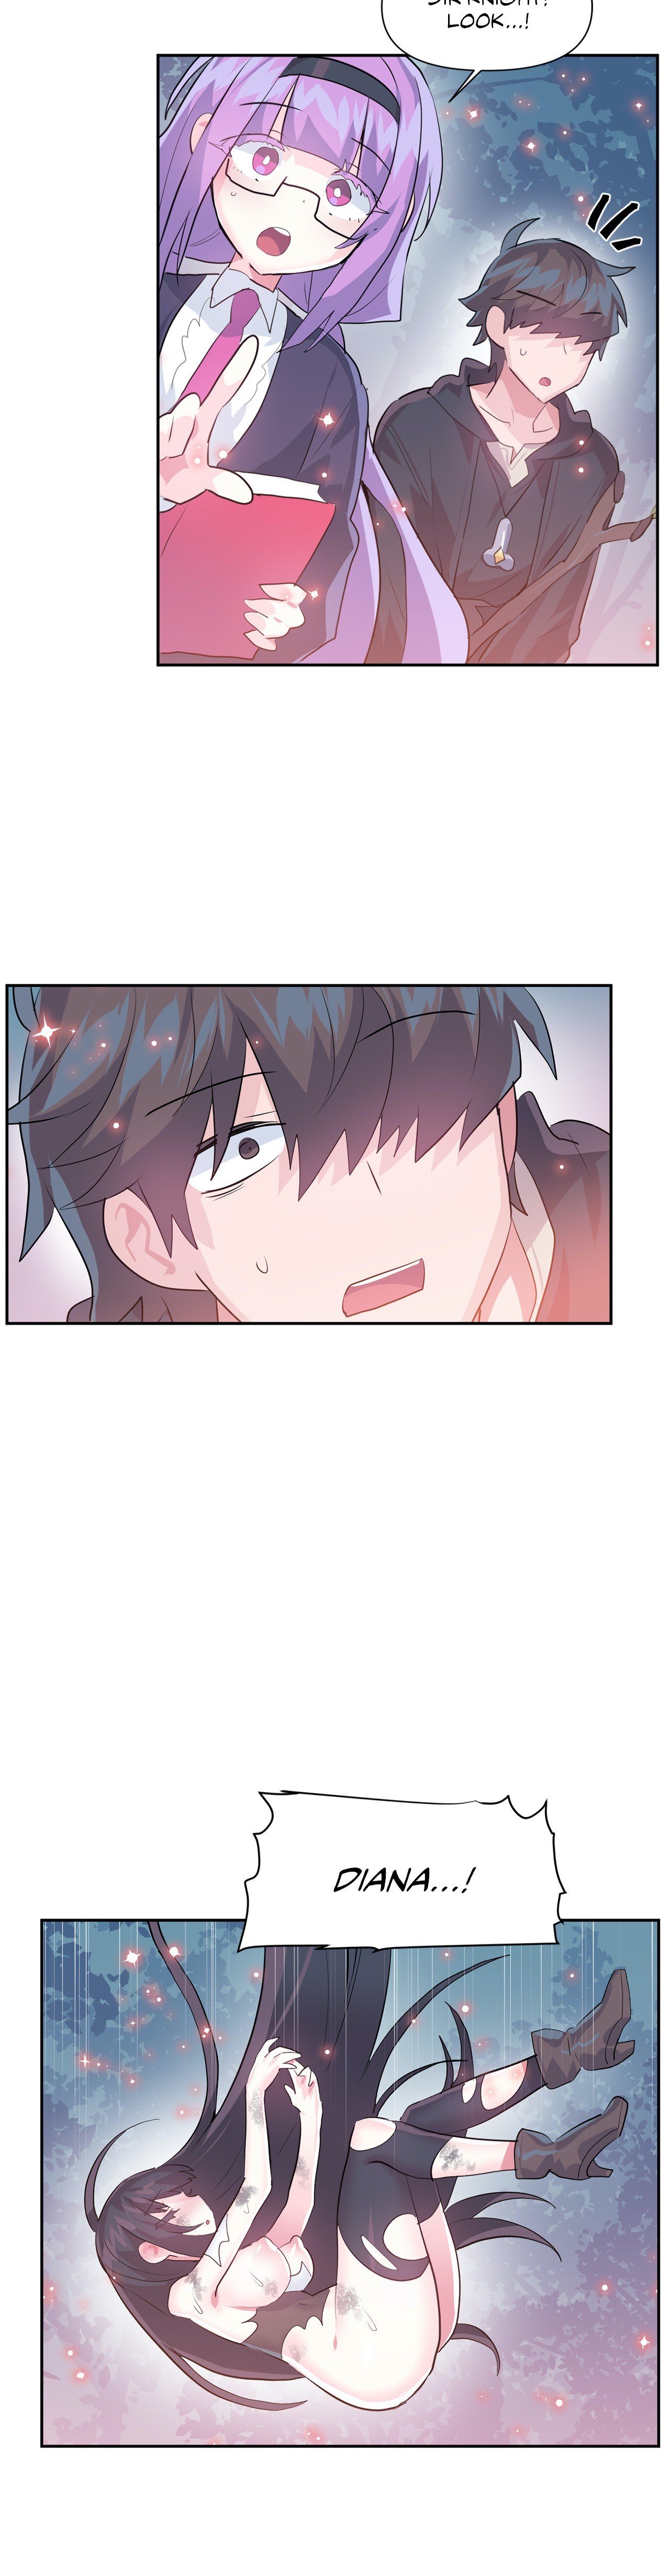 log-in-to-lust-a-land-chap-39-5